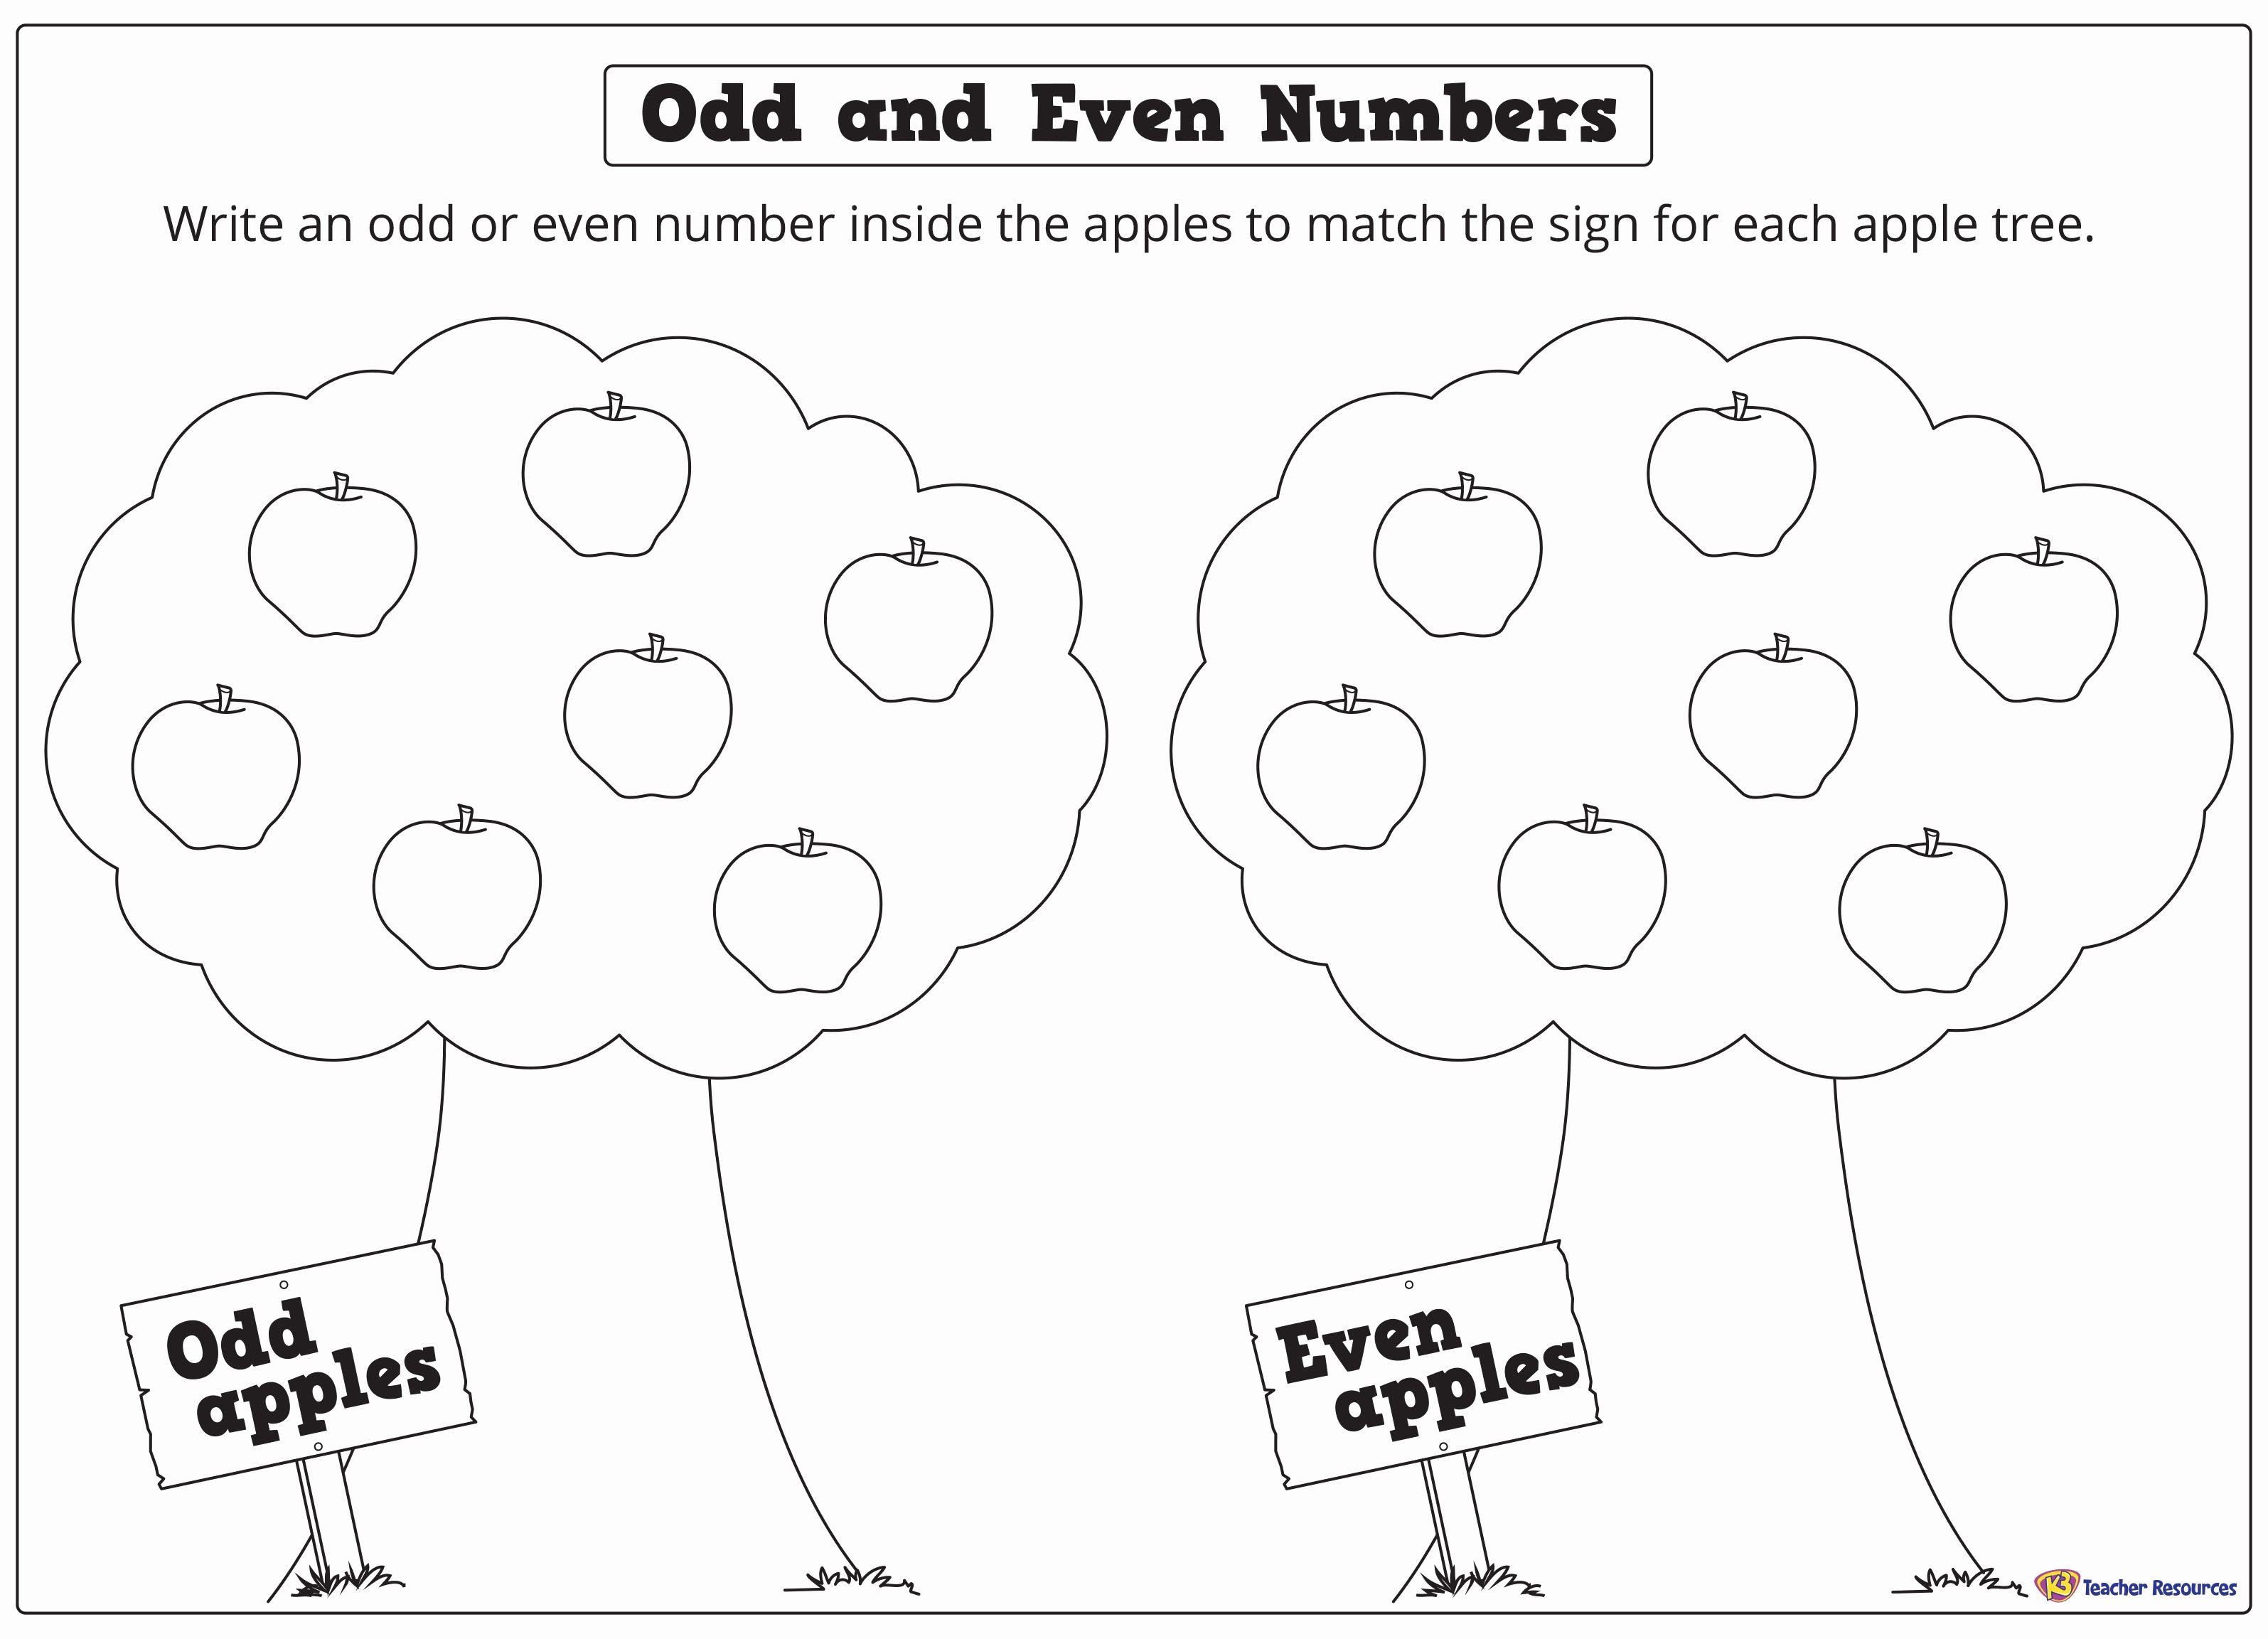 Odds and even Worksheet Beautiful Odd and even Numbers Apple Tree Worksheet K 3 Teacher